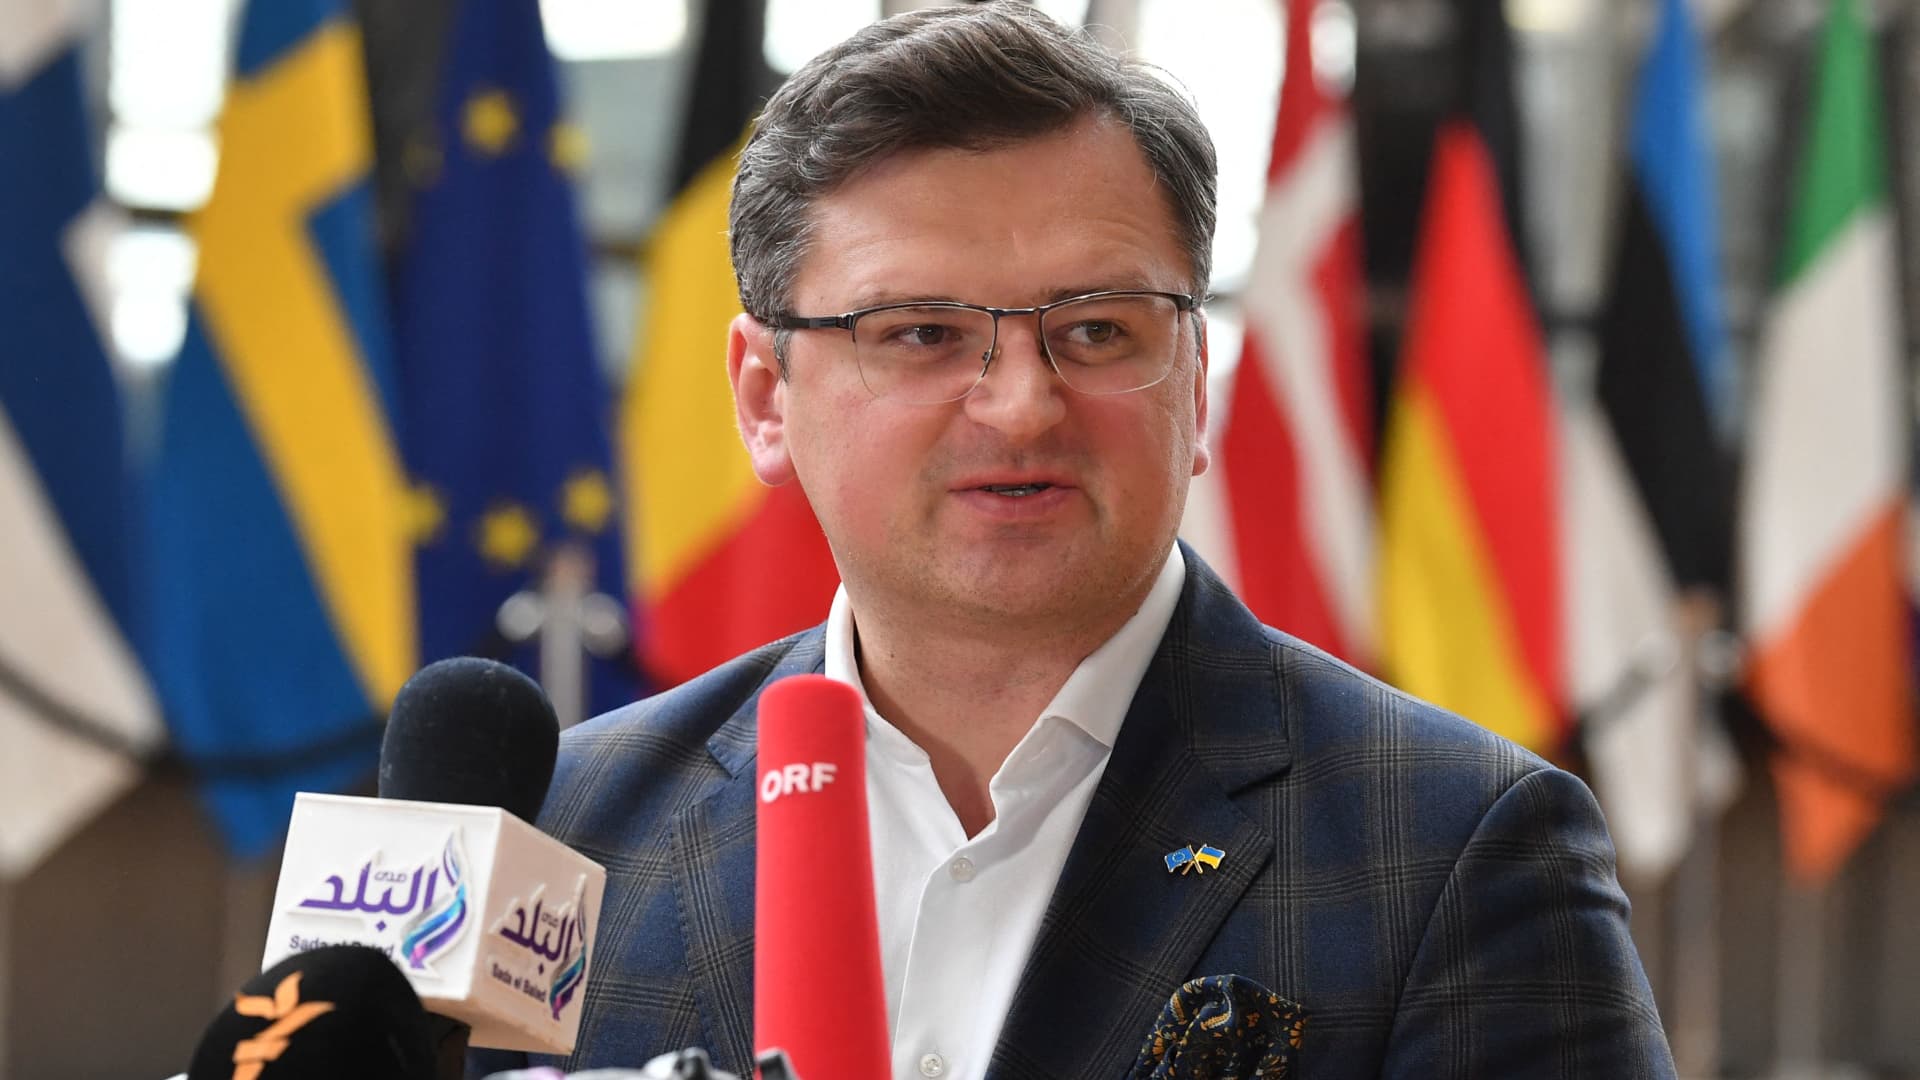 Ukrainian Foreign Minister Dmytro Kuleba answers journalists during a Foreign Affairs Council meeting at the EU headquarters in Brussels on May 16, 2022.